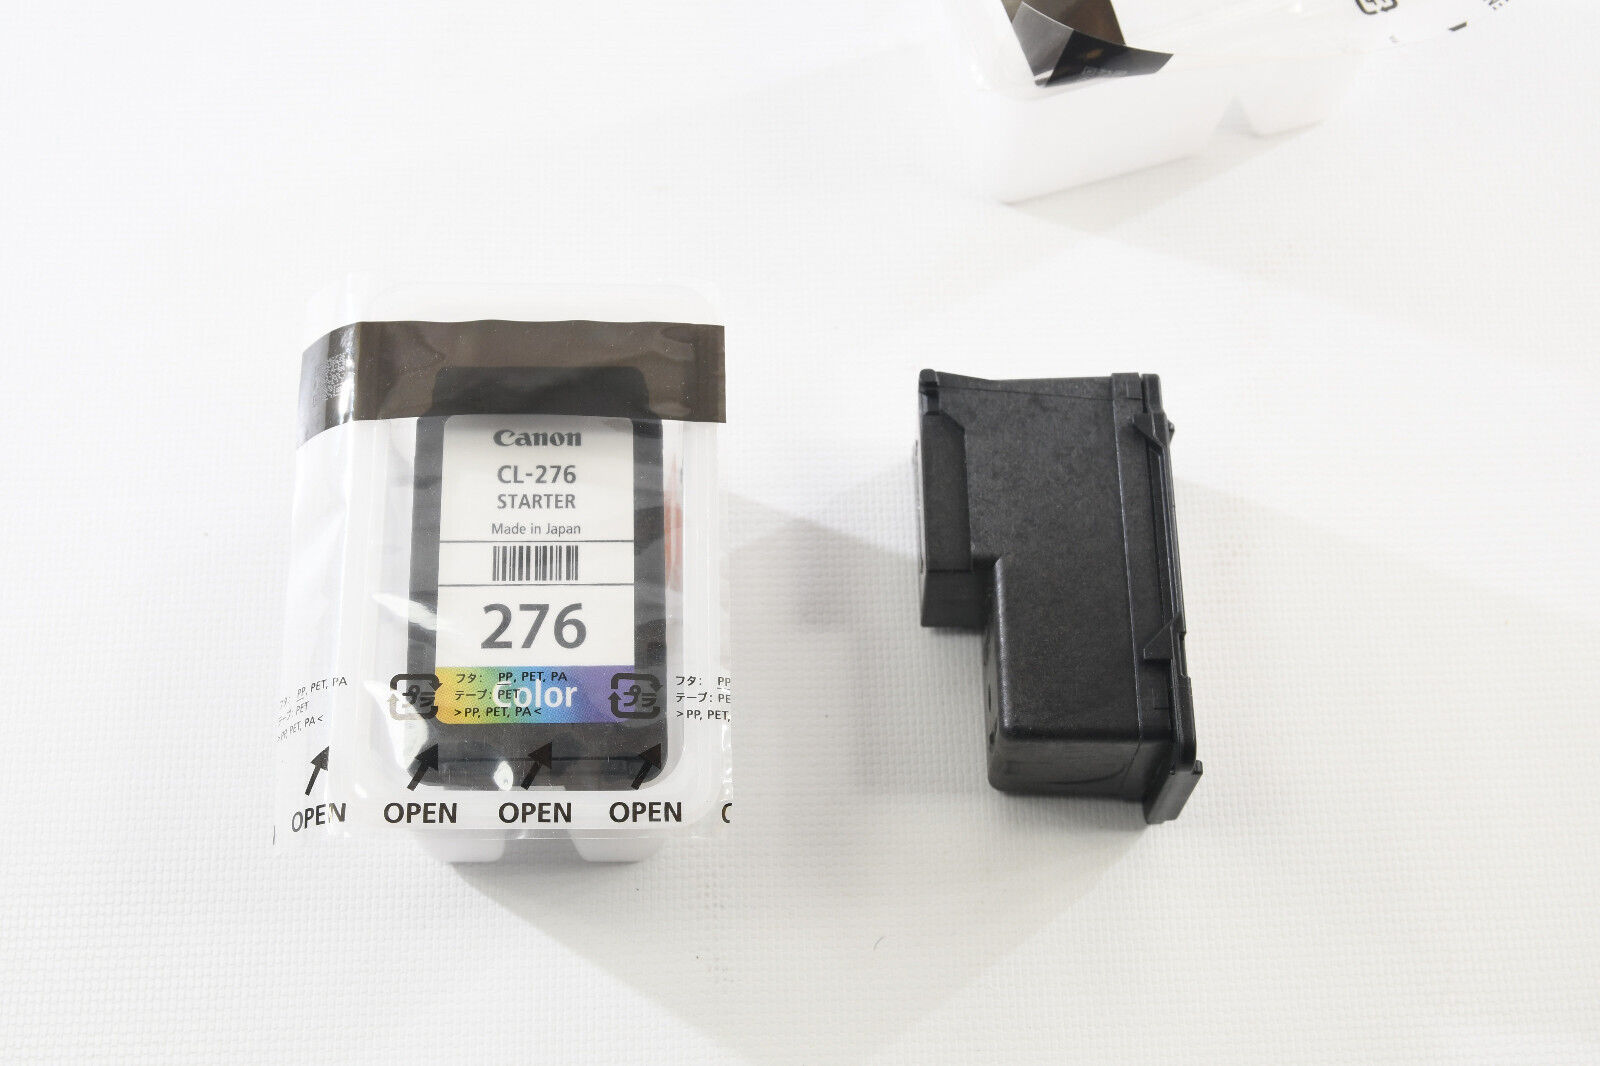 GENUINE Canon PG-275 CL-276 STARTER Ink for PIXMA TR4720 TS3520 TS3522